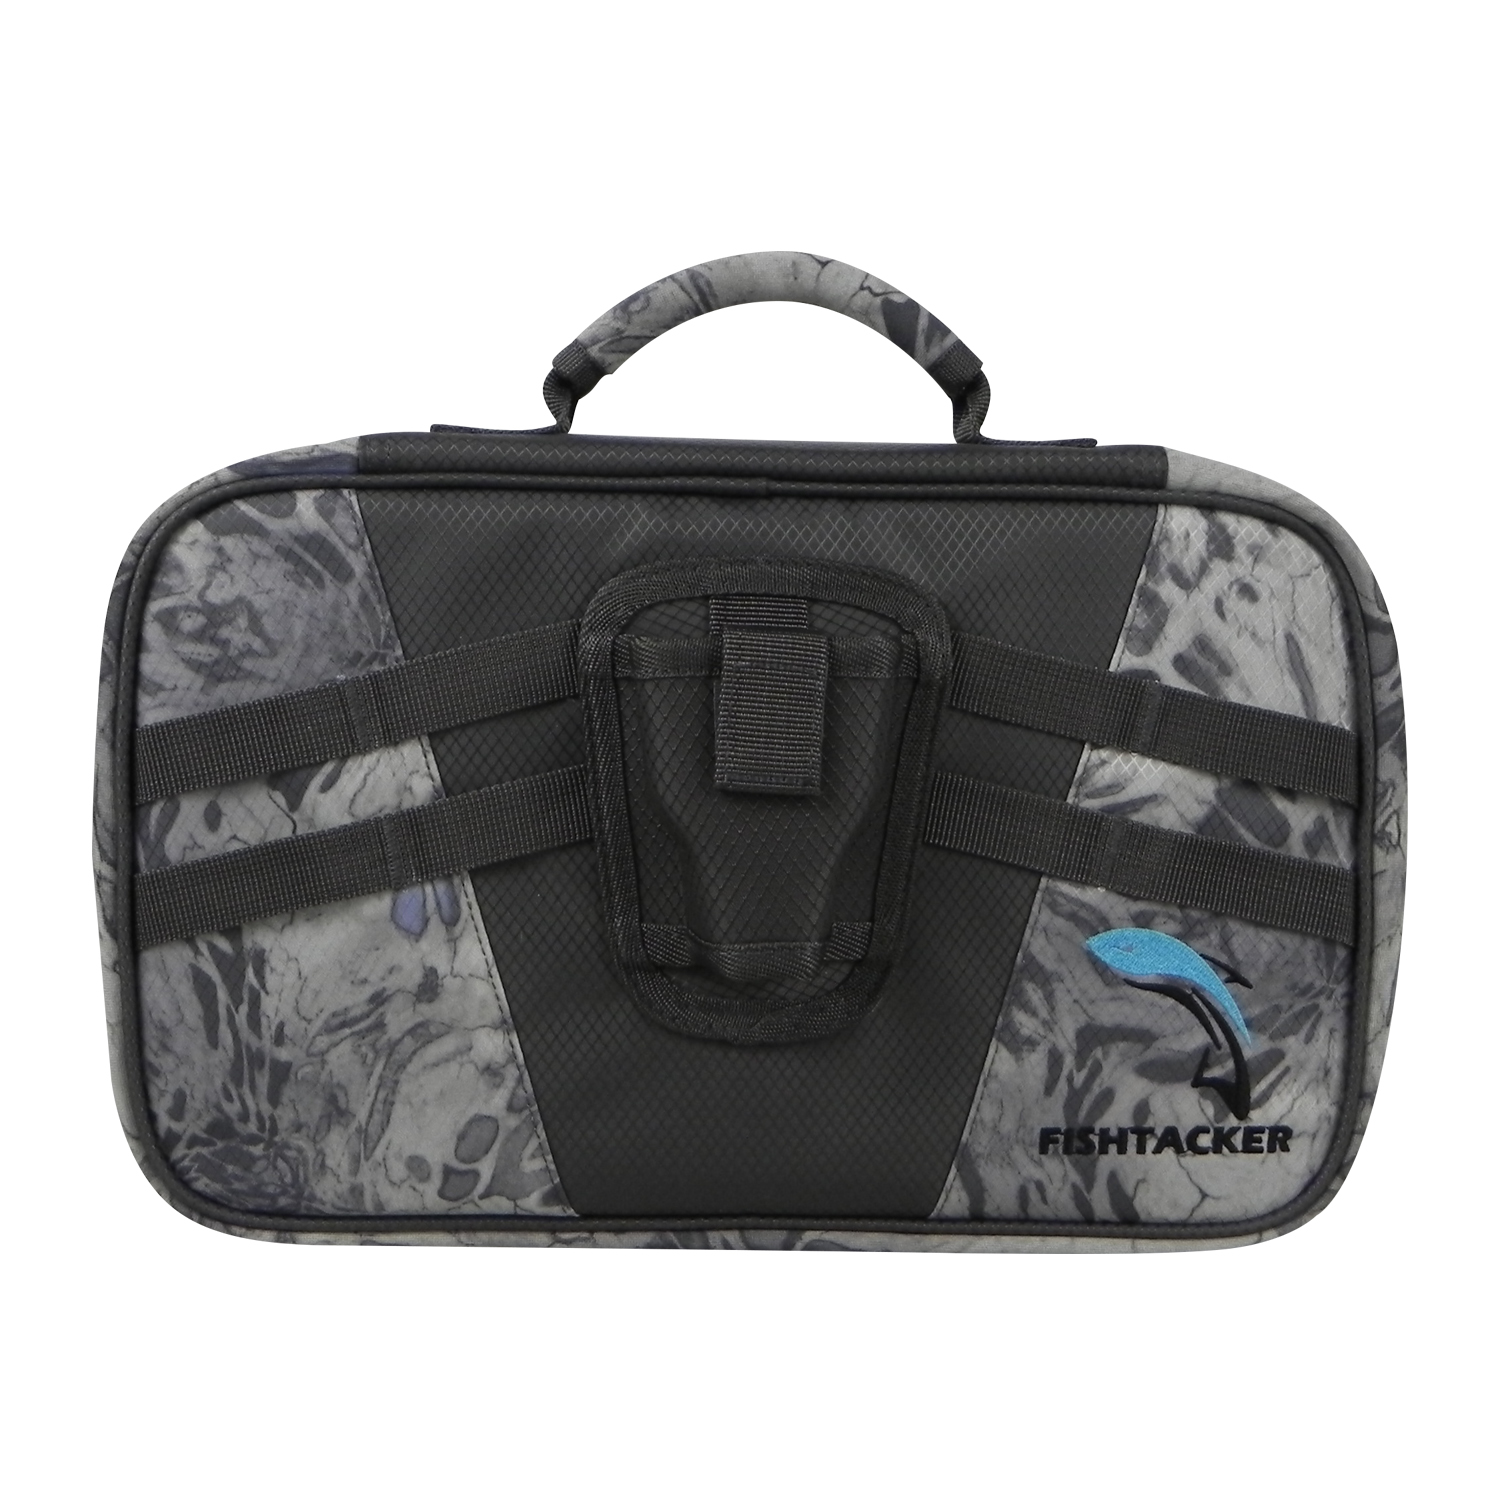 Fresh Water And Saltwater Fishing Tackle Binder Sea Fishing Organized  Storage Rig Bag for Baits Jigs And Lines Bait Bag from China manufacturer -  Guangzhou Huantai Outdoor Products Co., Ltd.